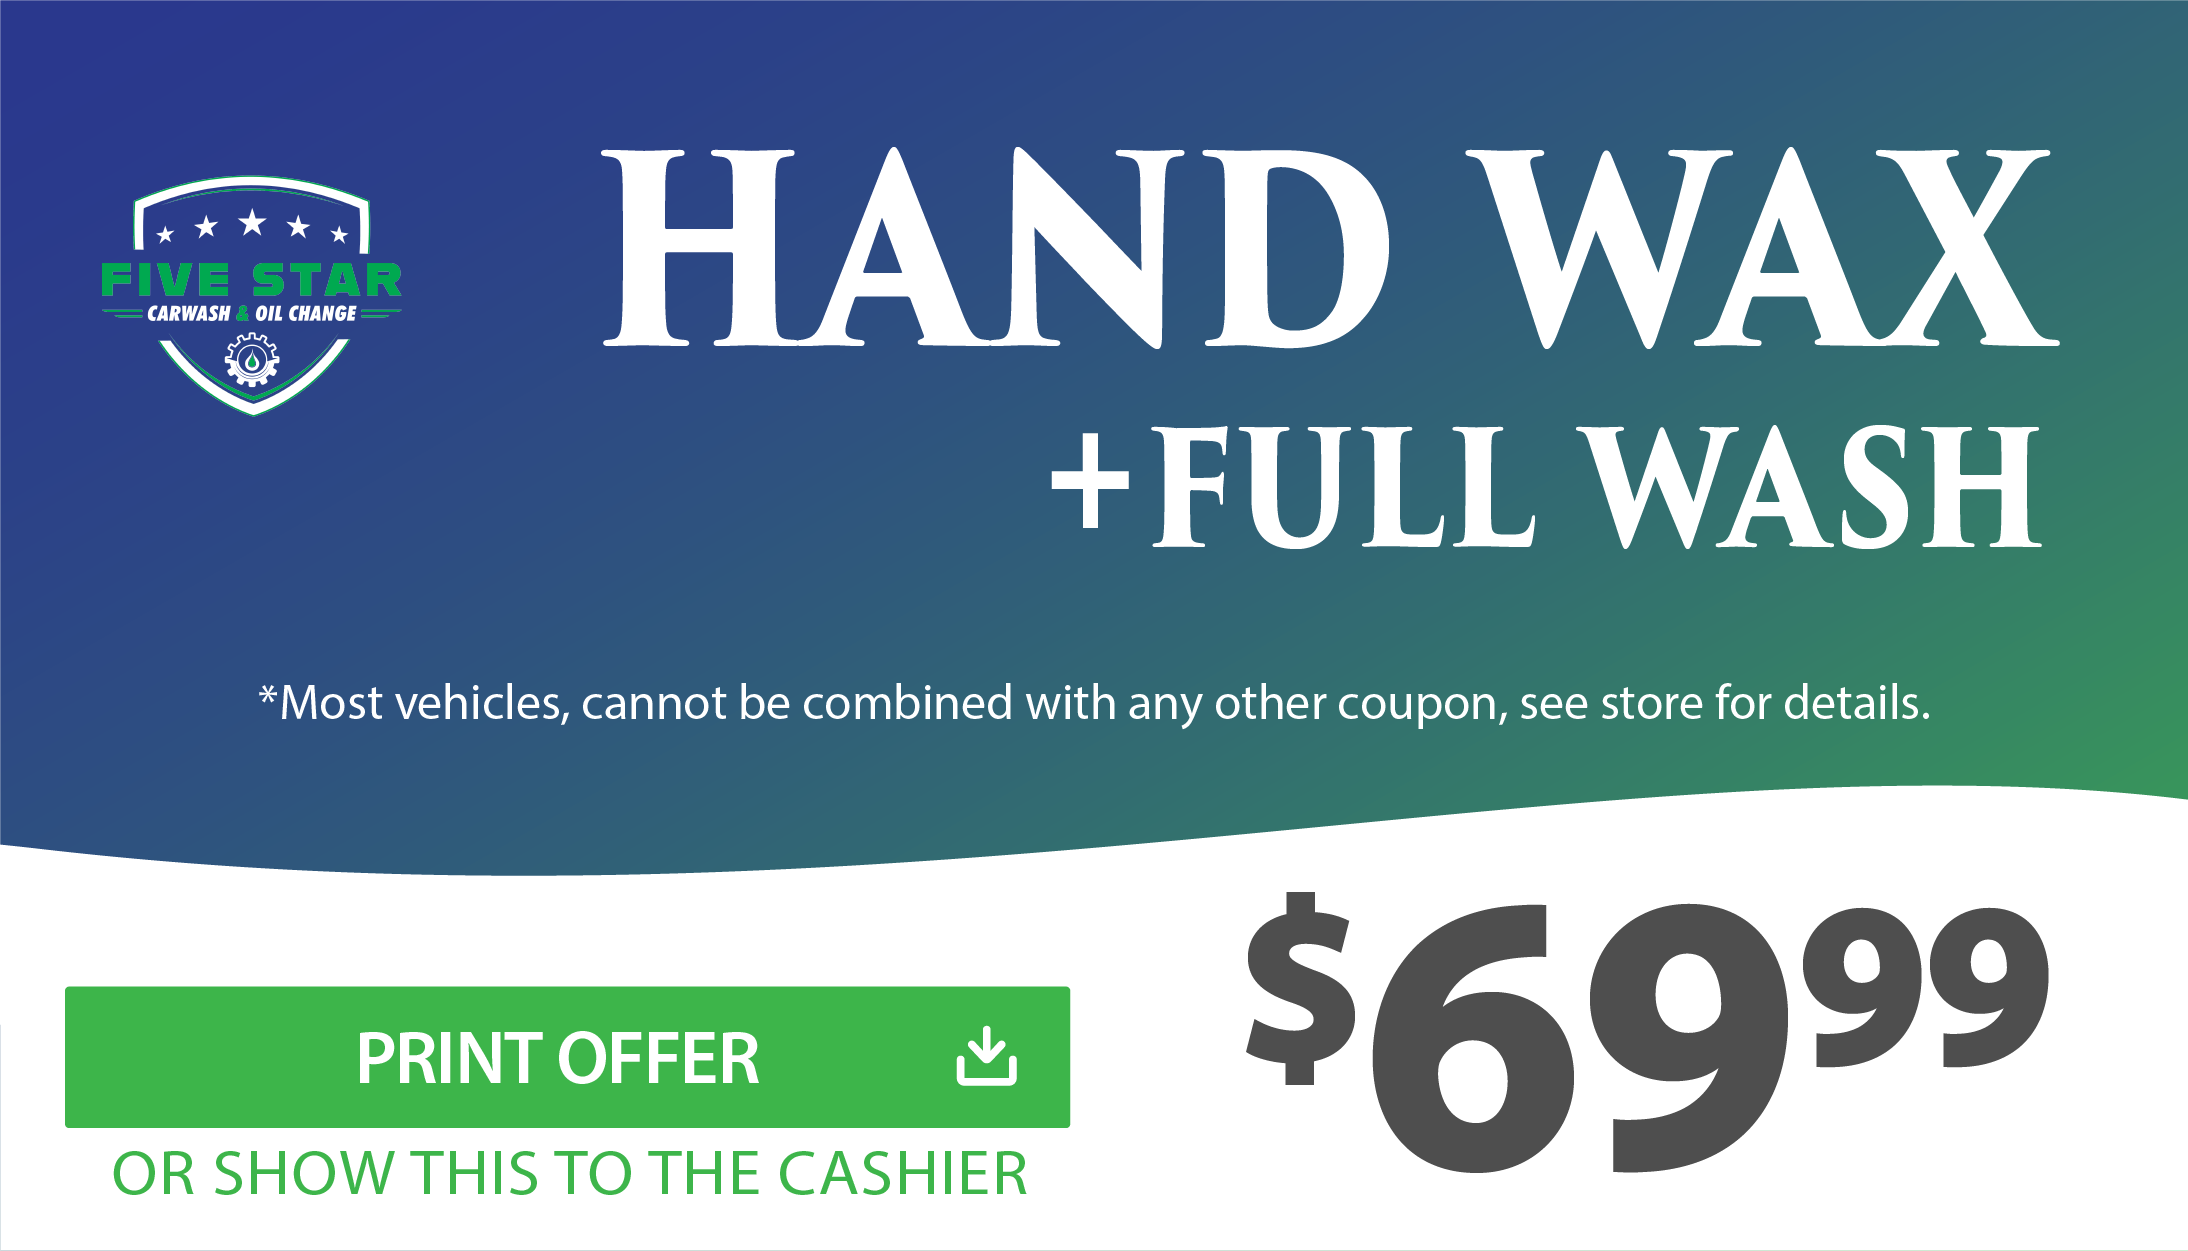 Hand Wax Special